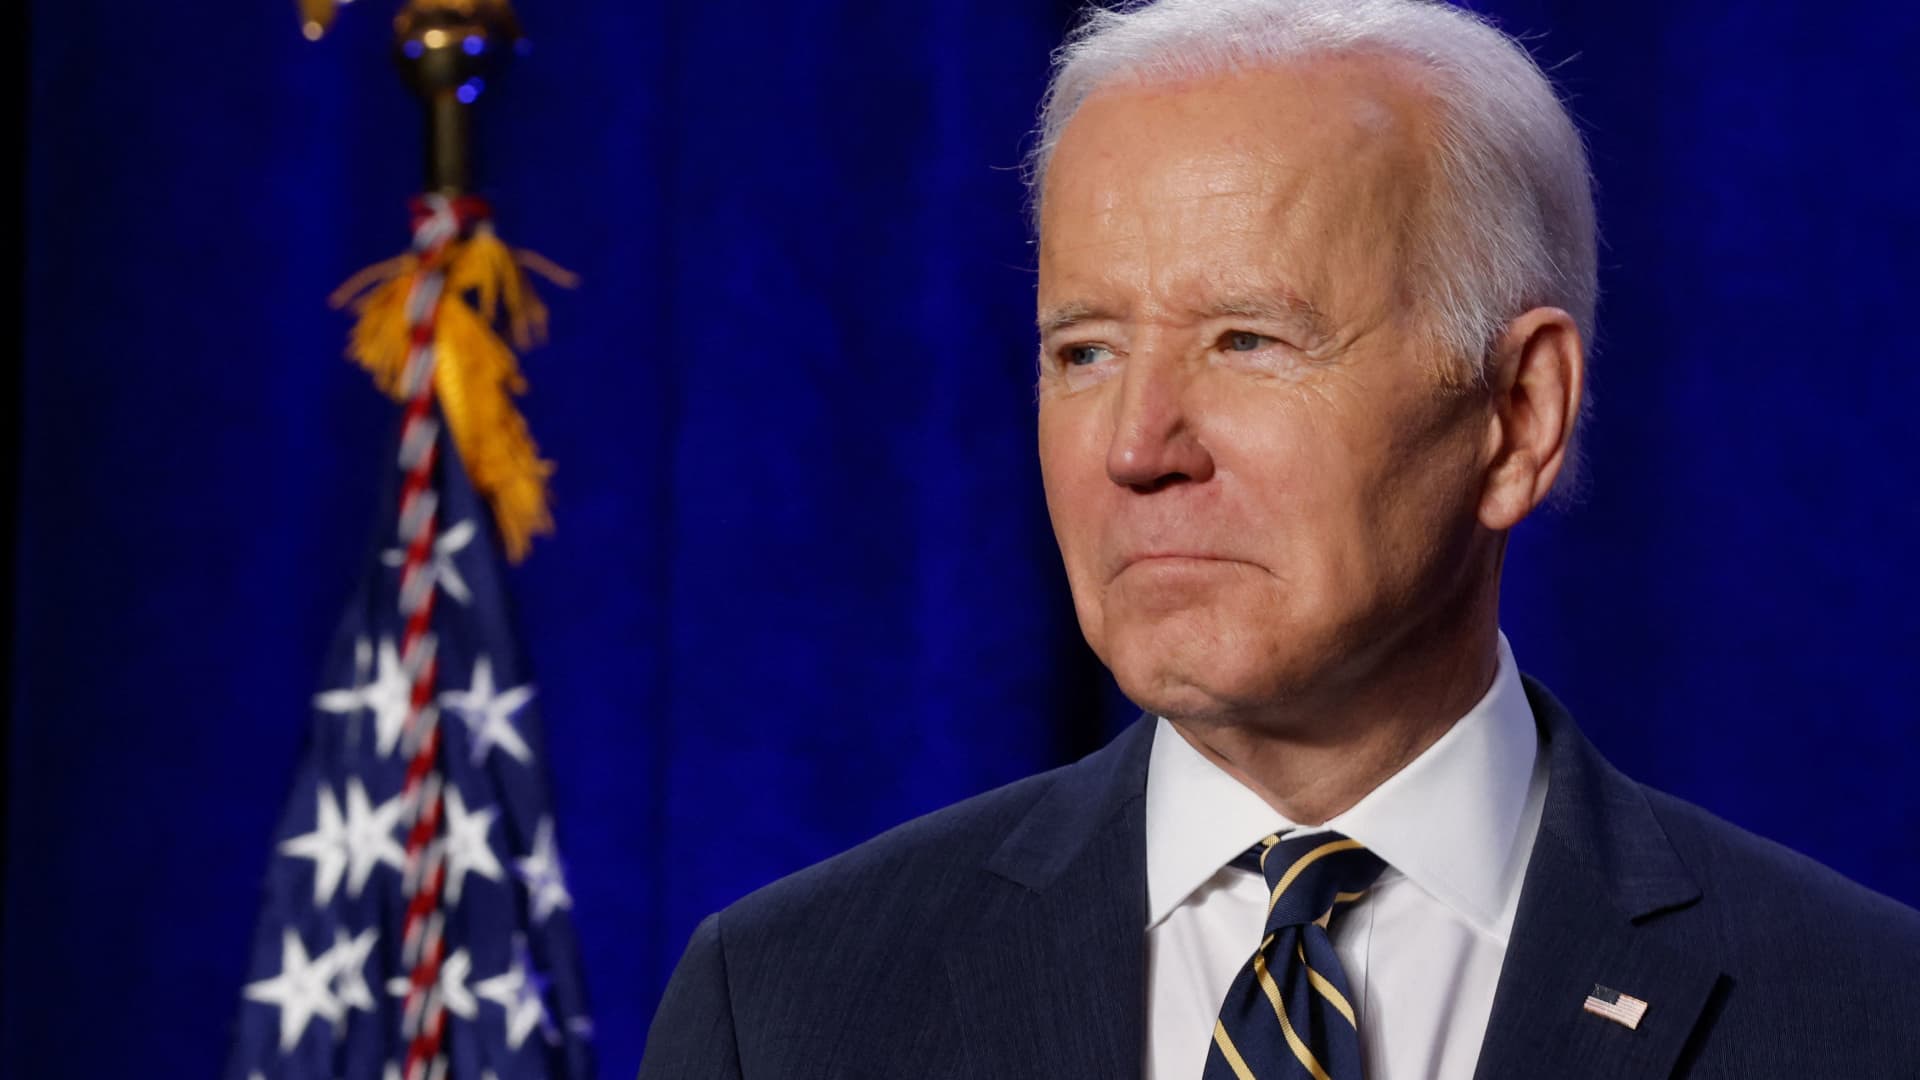 U.S. President Joe Biden reacts at the House Democratic Caucus Issues Conference in Philadelphia, Pennsylvania, March 11, 2022.